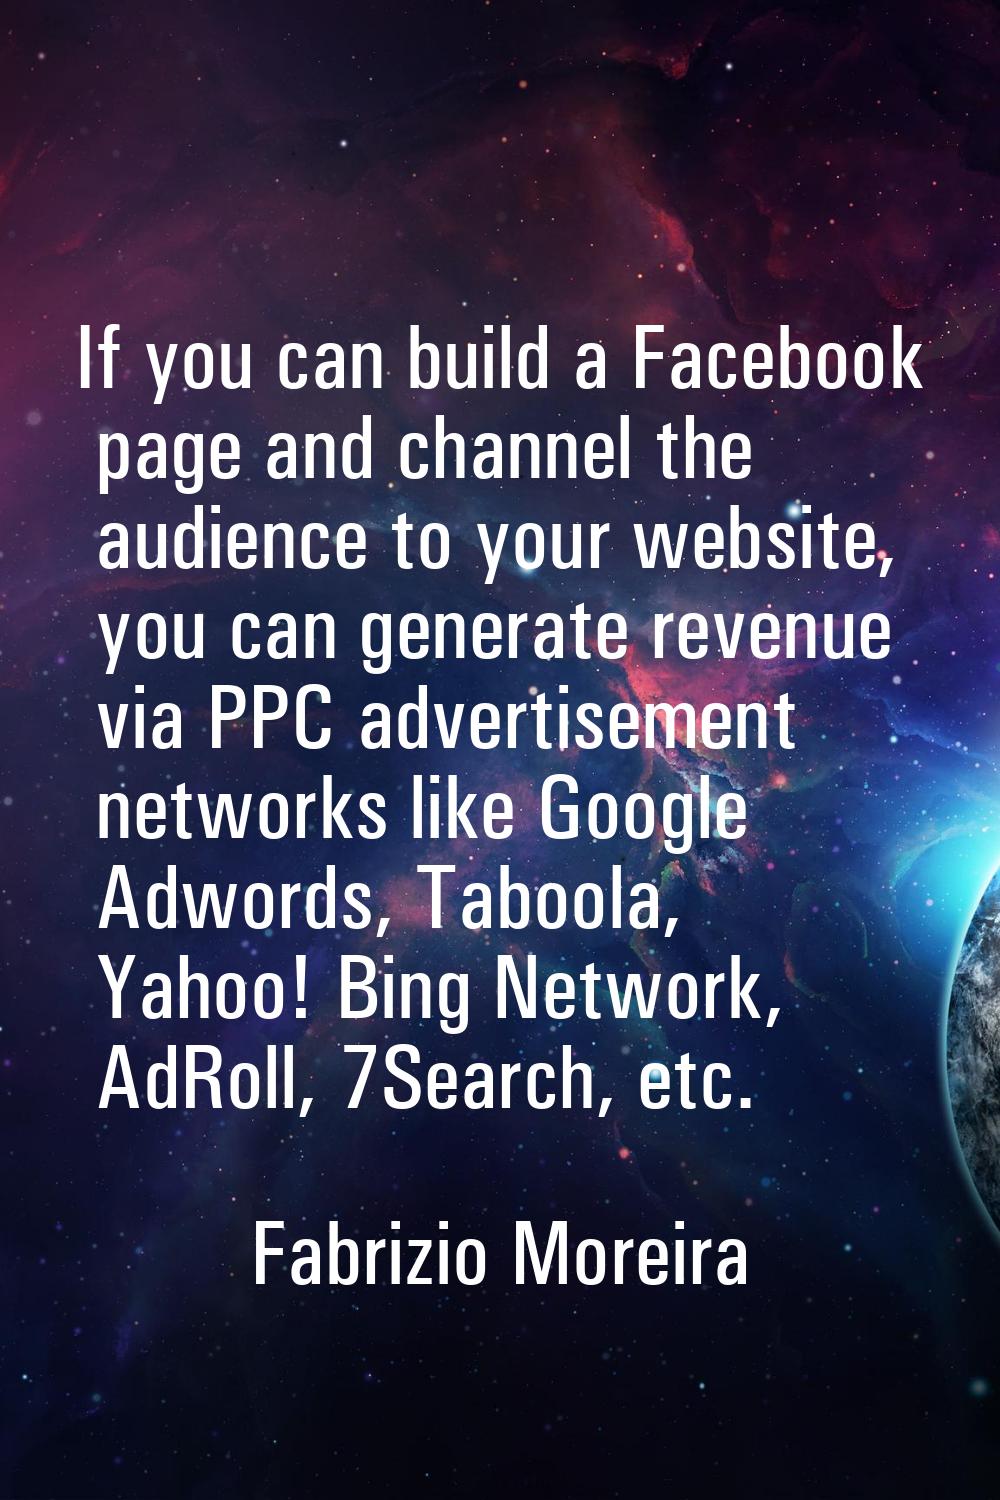 If you can build a Facebook page and channel the audience to your website, you can generate revenue